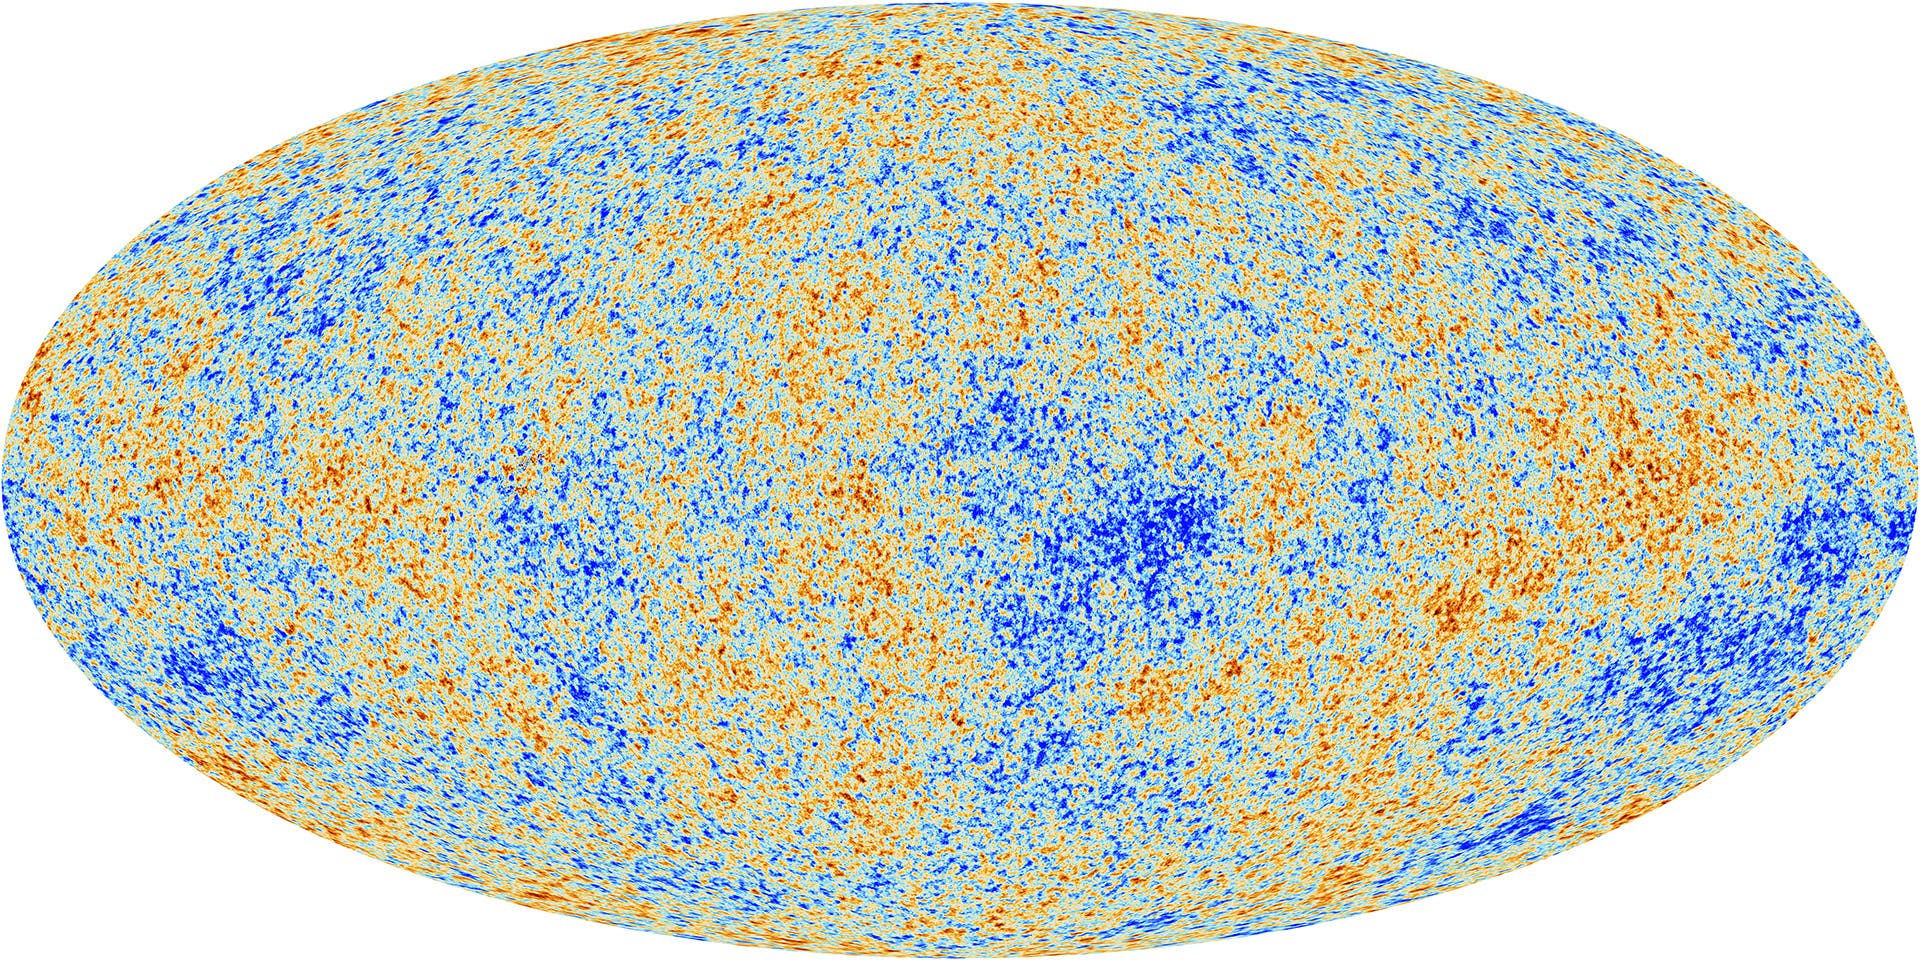 The Universe in 10 Features – 2. Cosmic Microwave Background